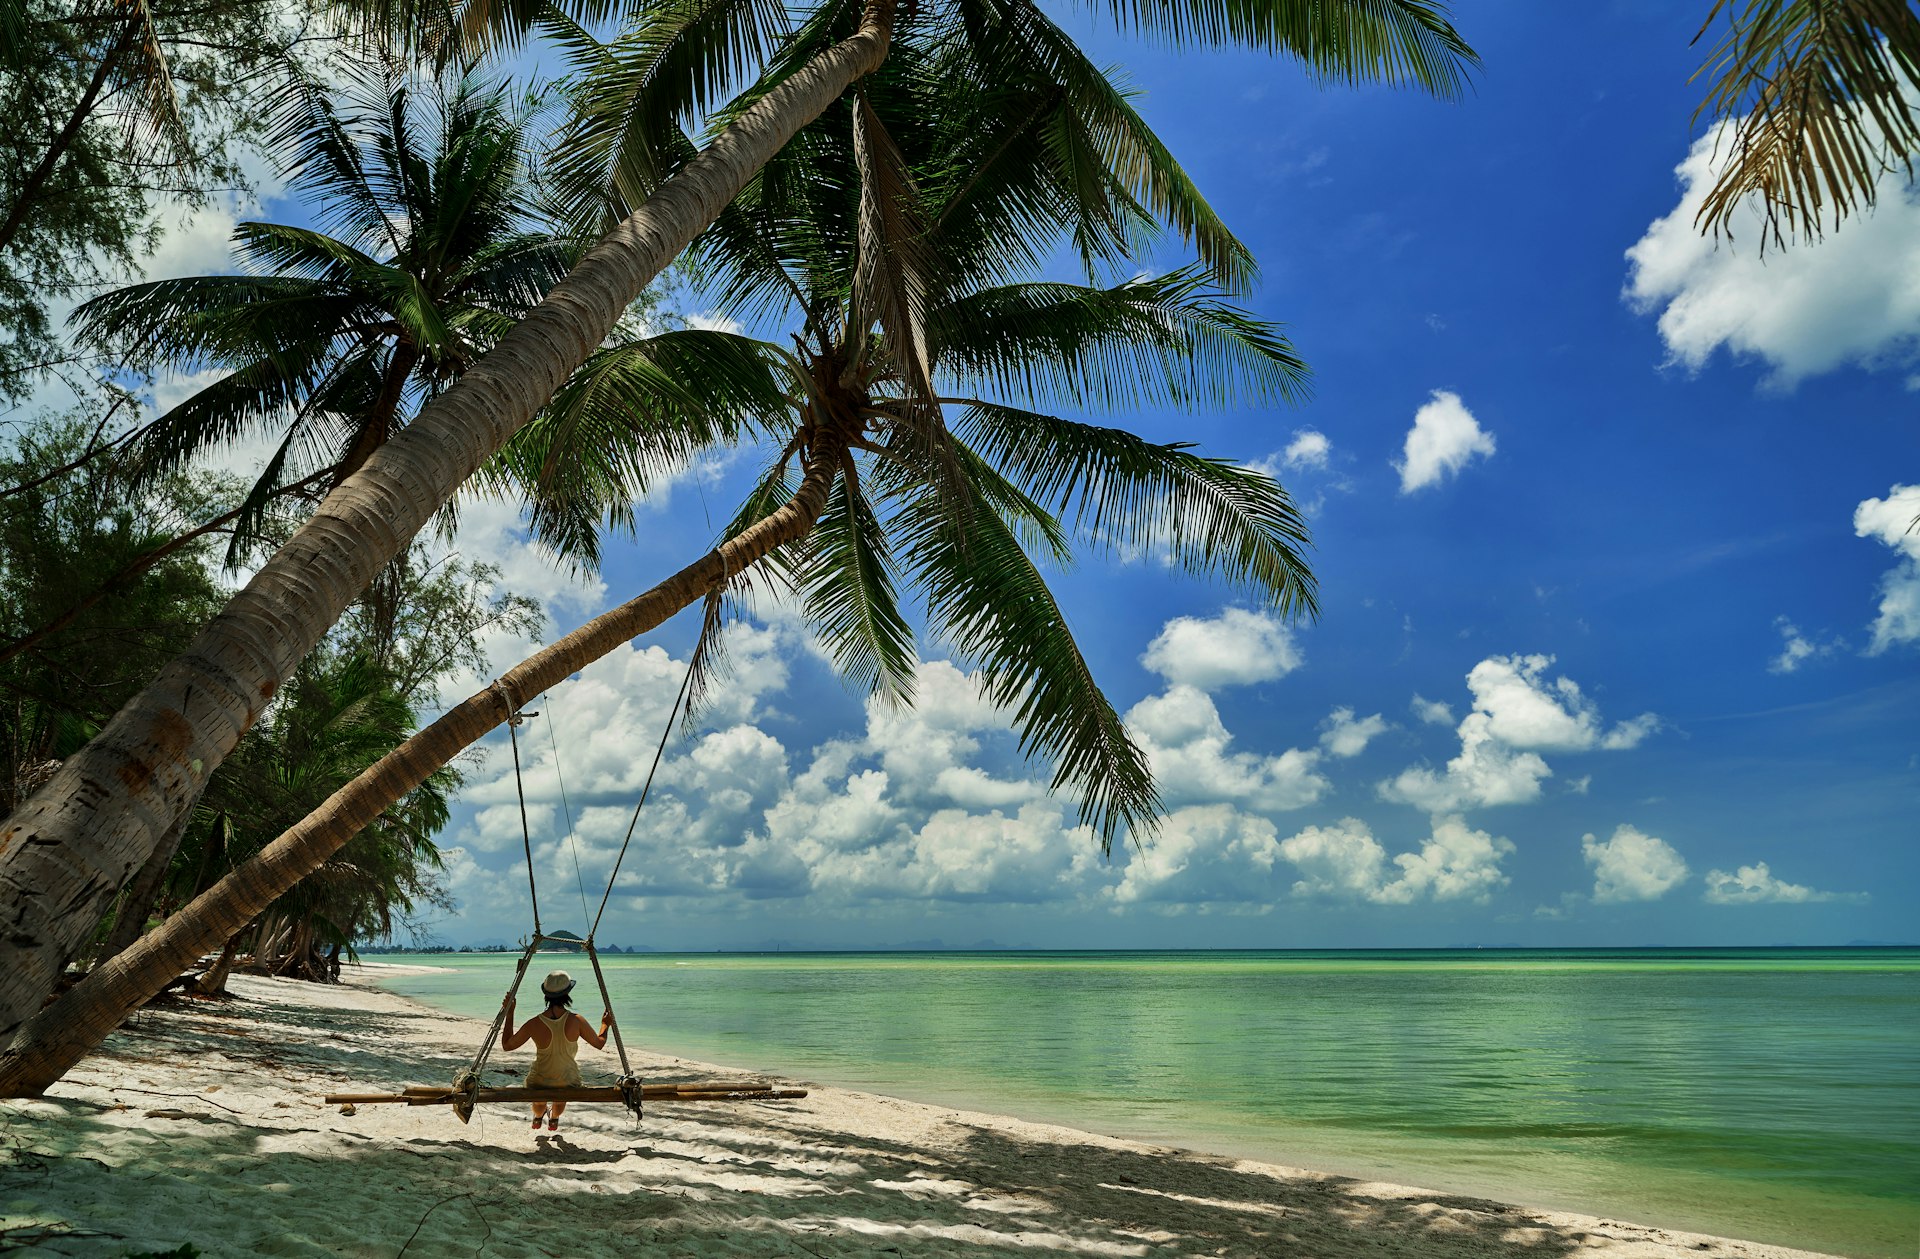 A woman sits on a swing suspended from a palm on a beach in Koh Samui